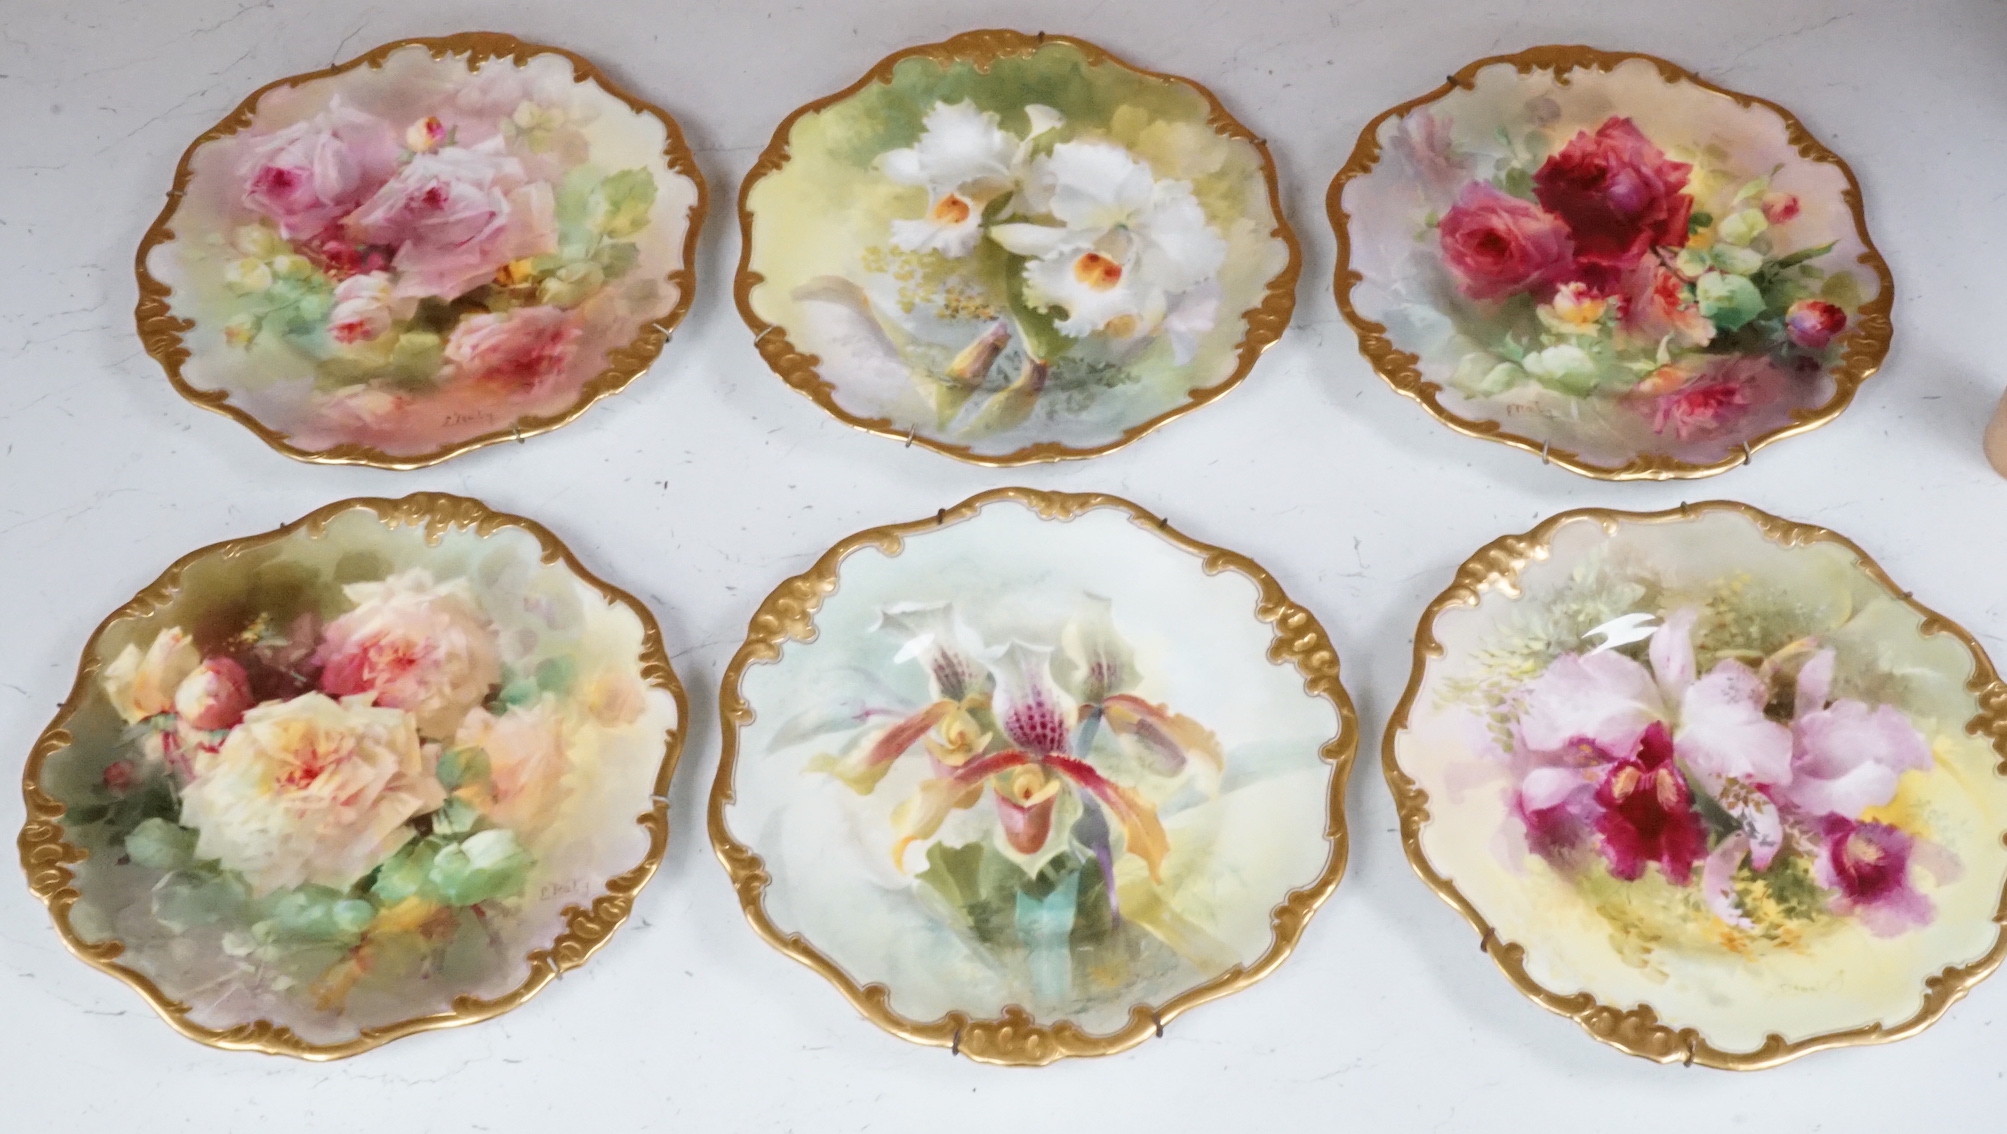 Six Royal Doulton floral painted plates, three signed E. Raby and three signed D. Dewsberry